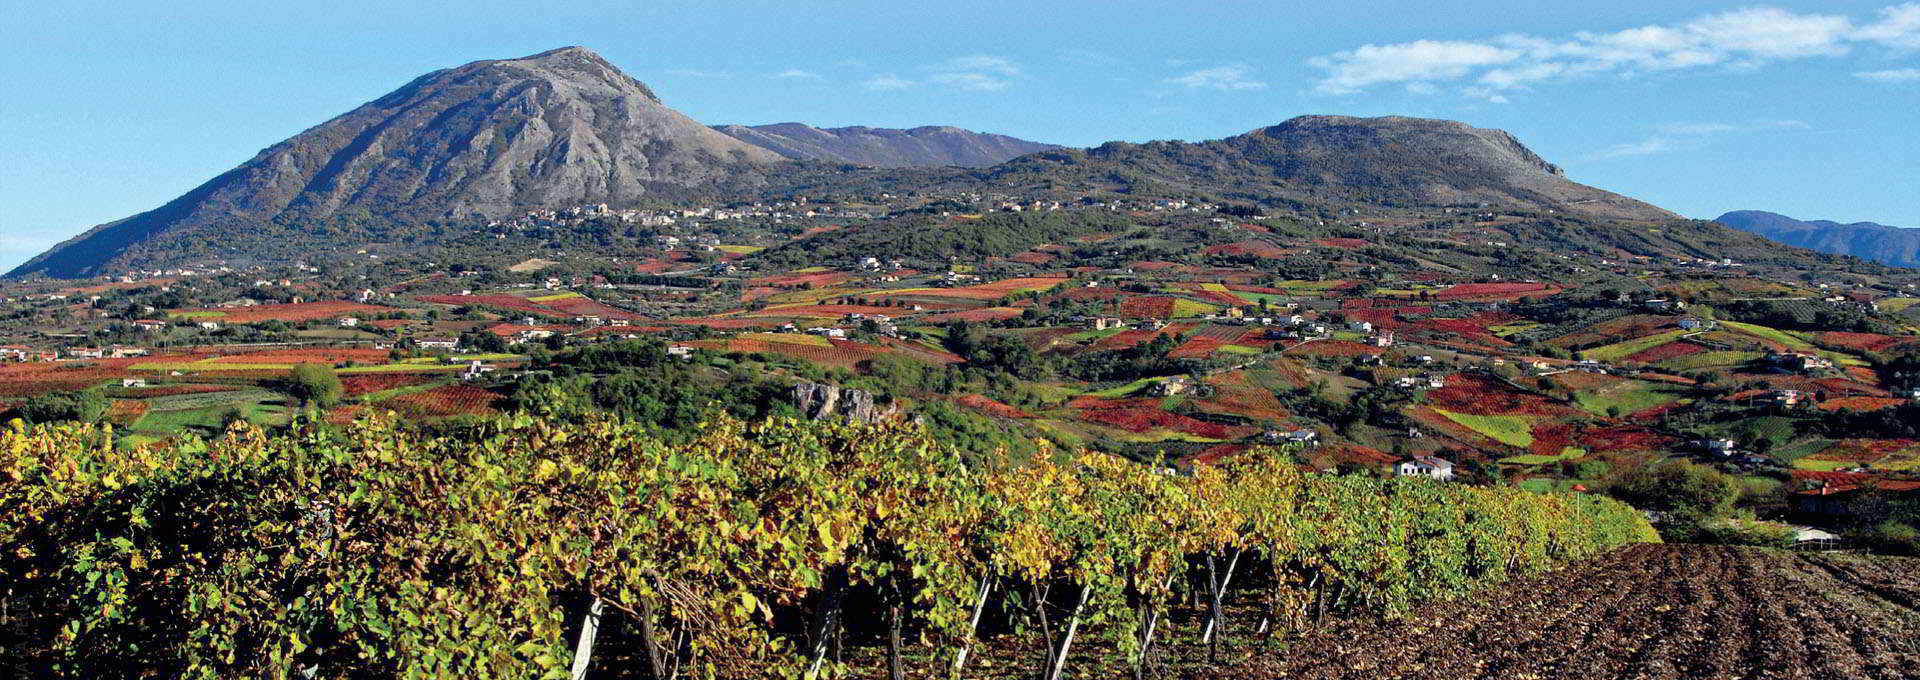 Sannio Wines, conceived of the DNA of Campania.